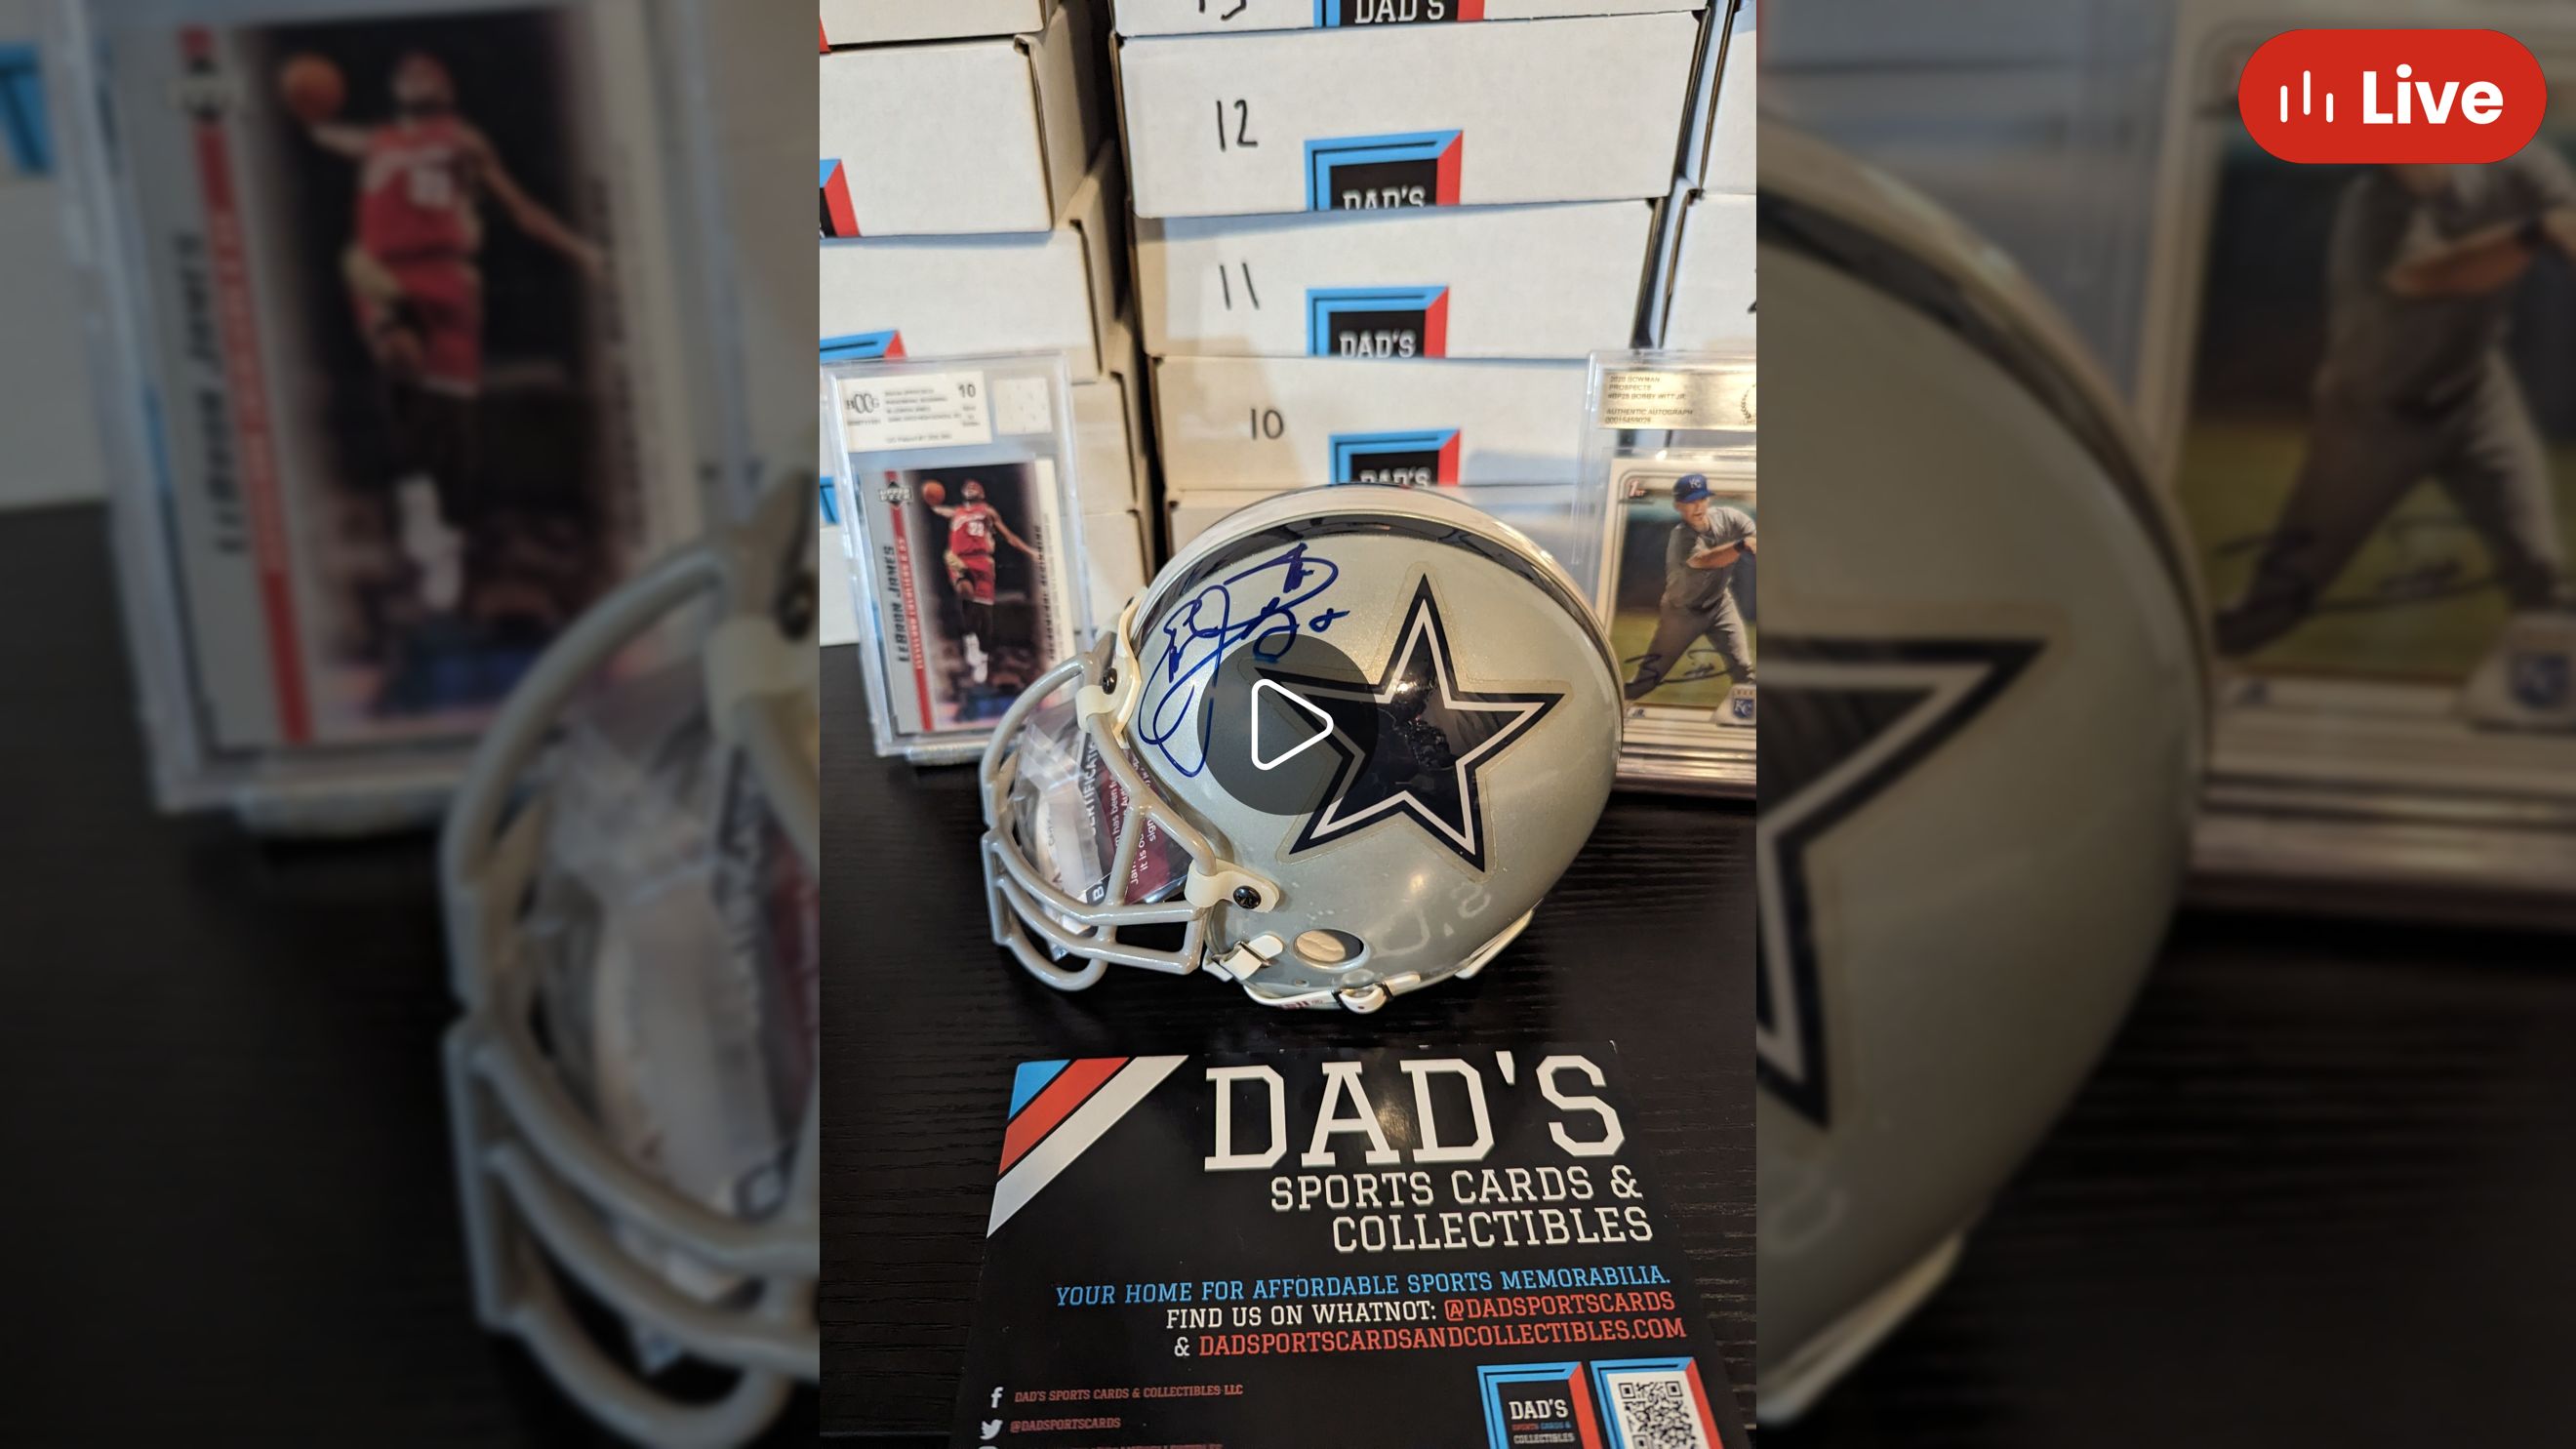 Whatnot Dads High End Mystery Box Show 🔥💰 Livestream By Dadsportscards Footballmystery